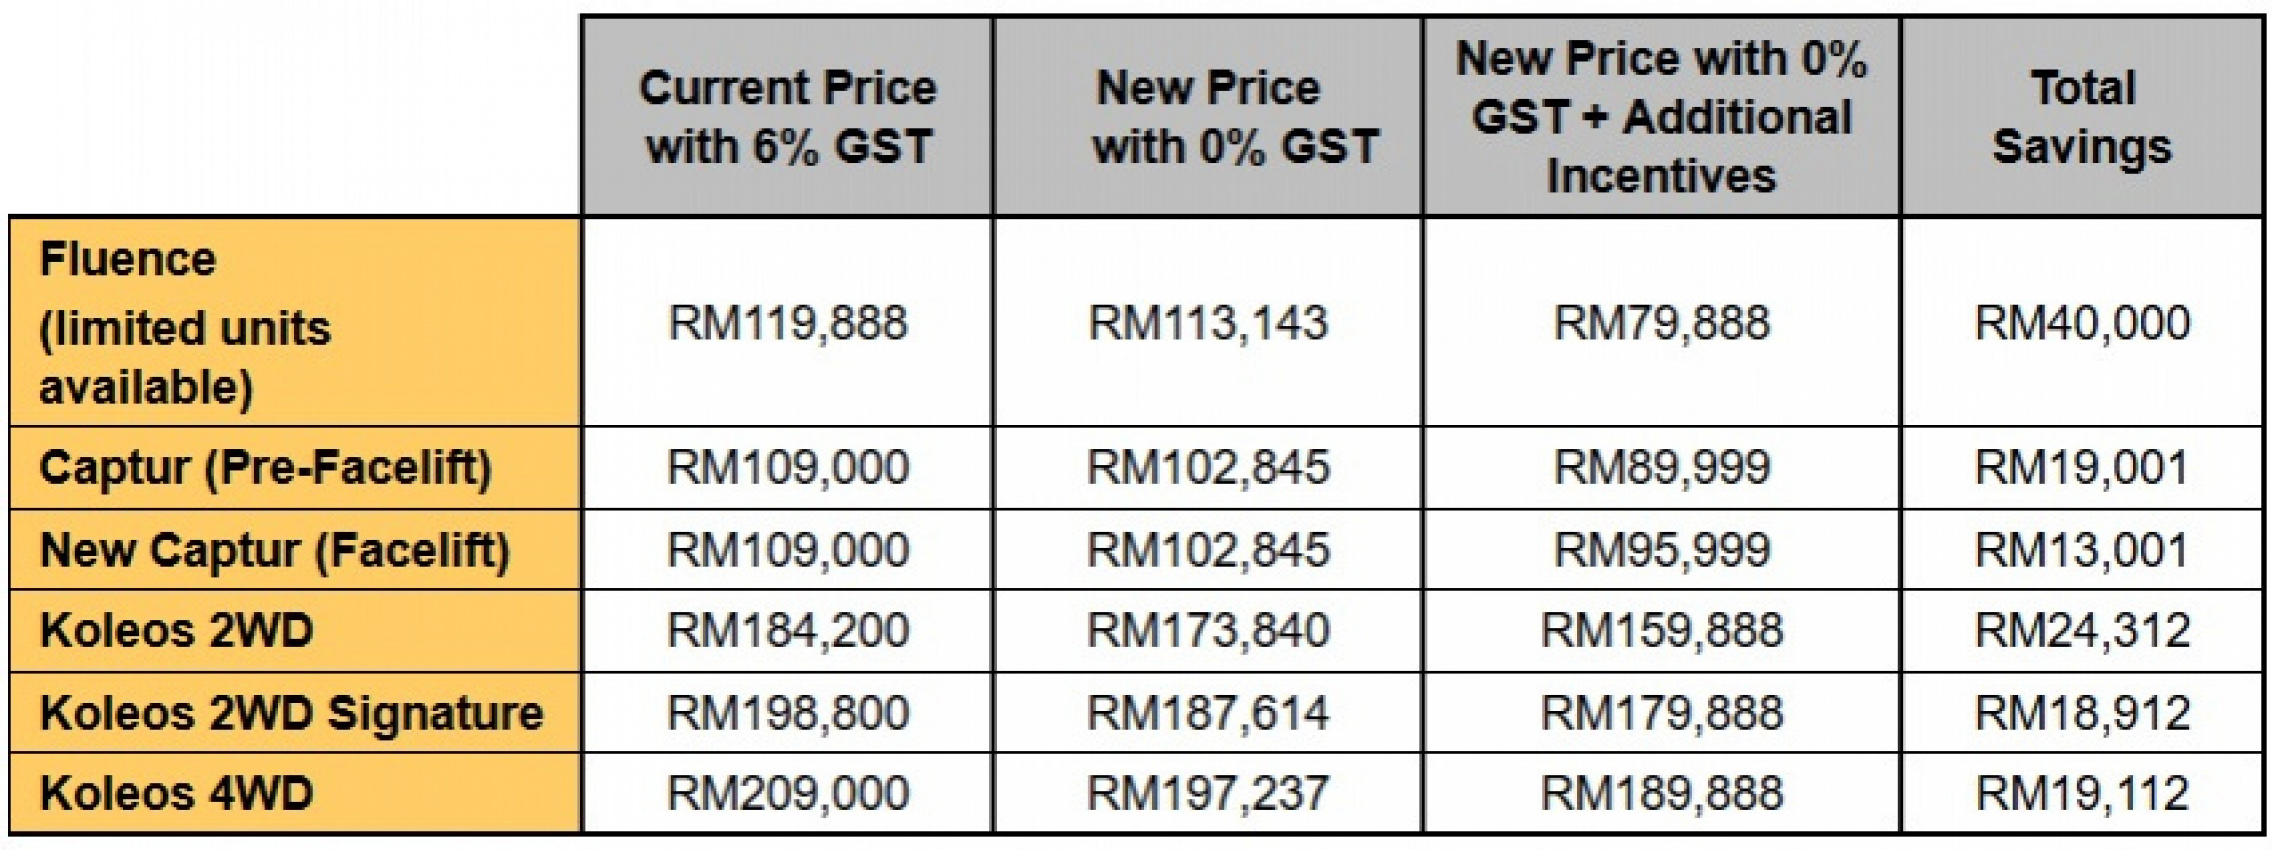 autos, car brands, cars, renault, malaysia, renault cars, tc euro cars, renault prices in malaysia revised for 0% gst; includes extra incentives for more savings